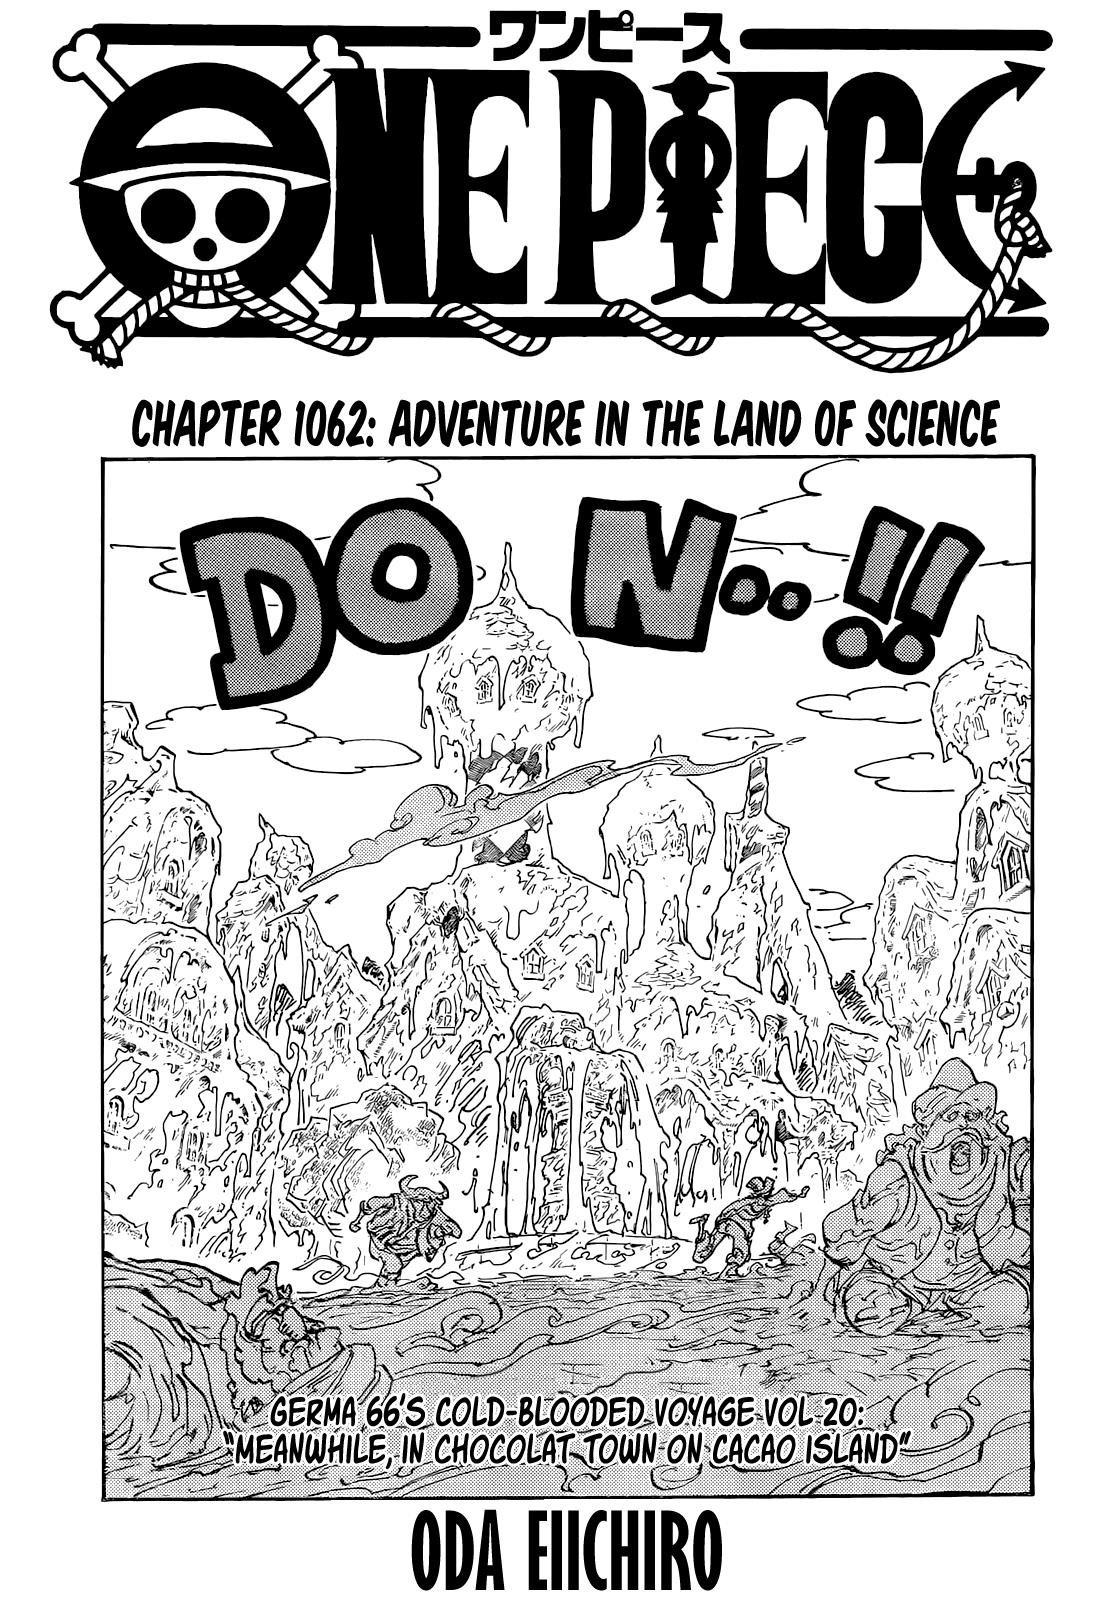 One Piece Chapter 1061 Spoiler! English! (Summary at the Comment